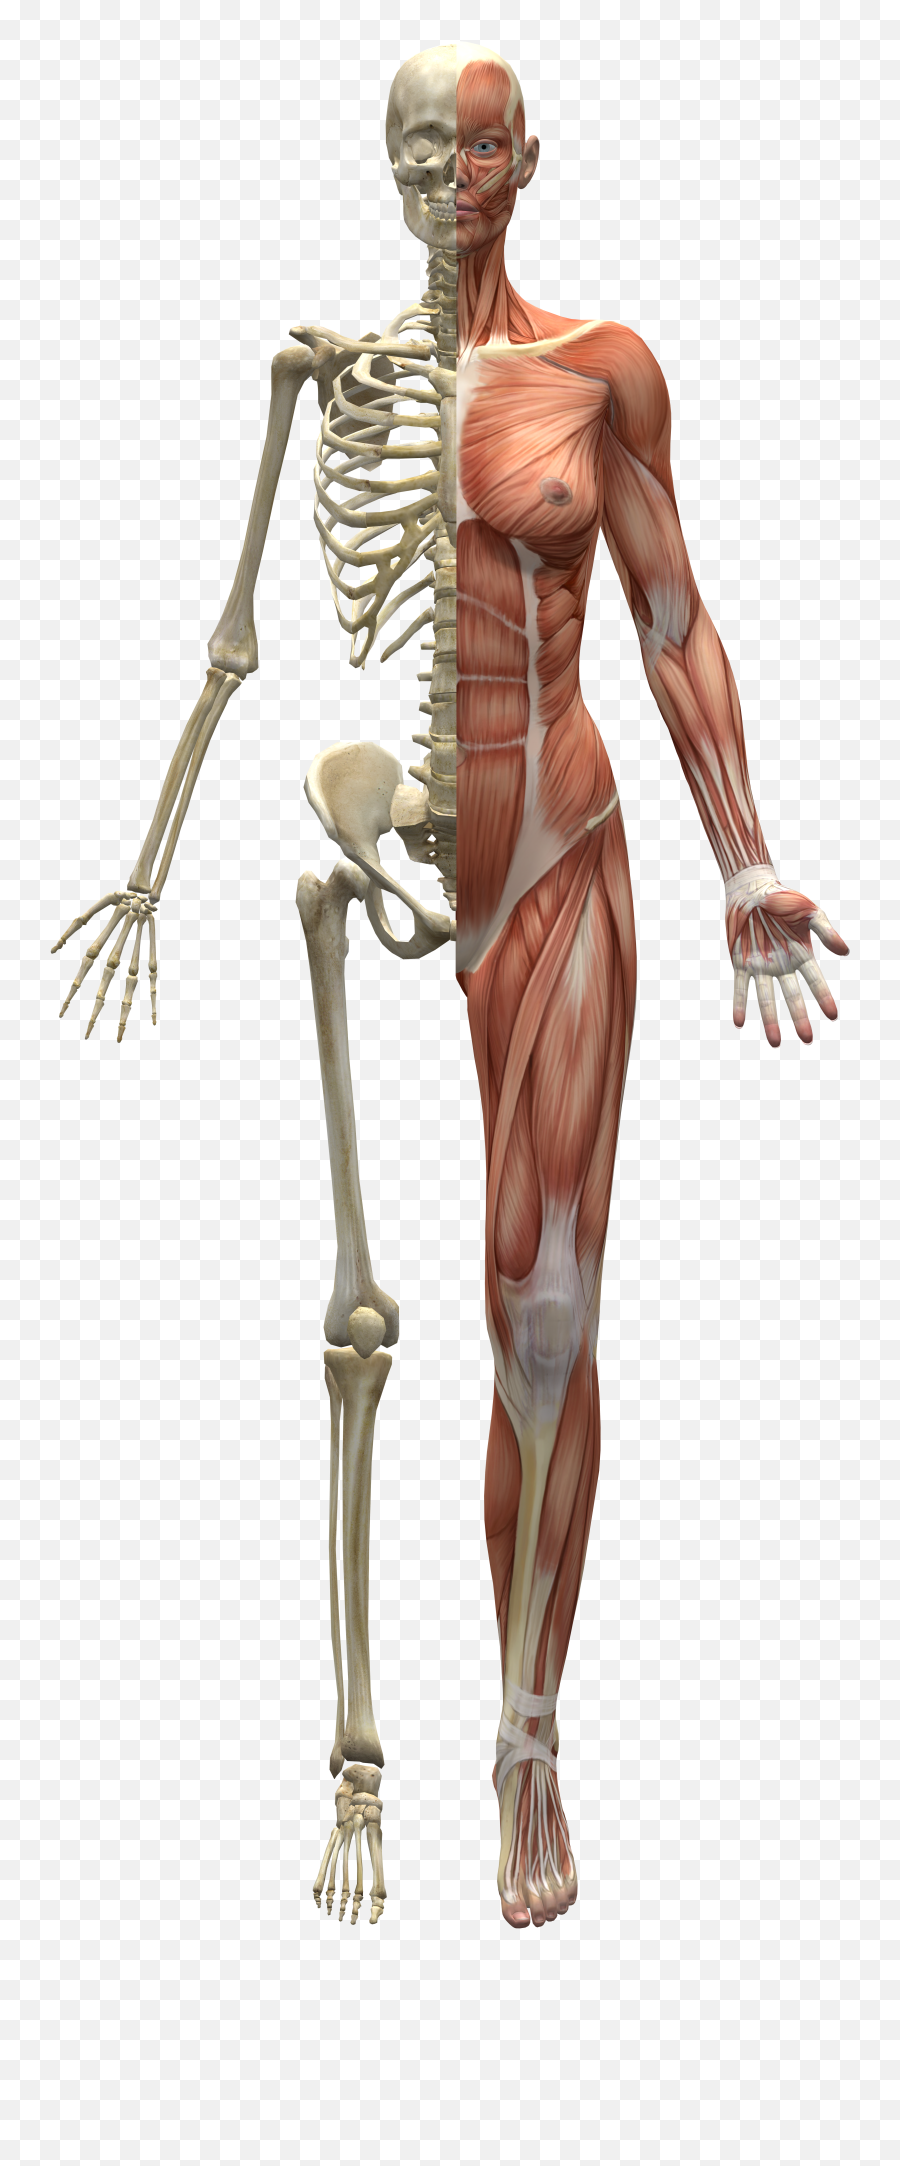 Fileskeleton And Musclespng - Wikimedia Commons Does Vitamin D Affect Your Bones,Skeleton Png Transparent